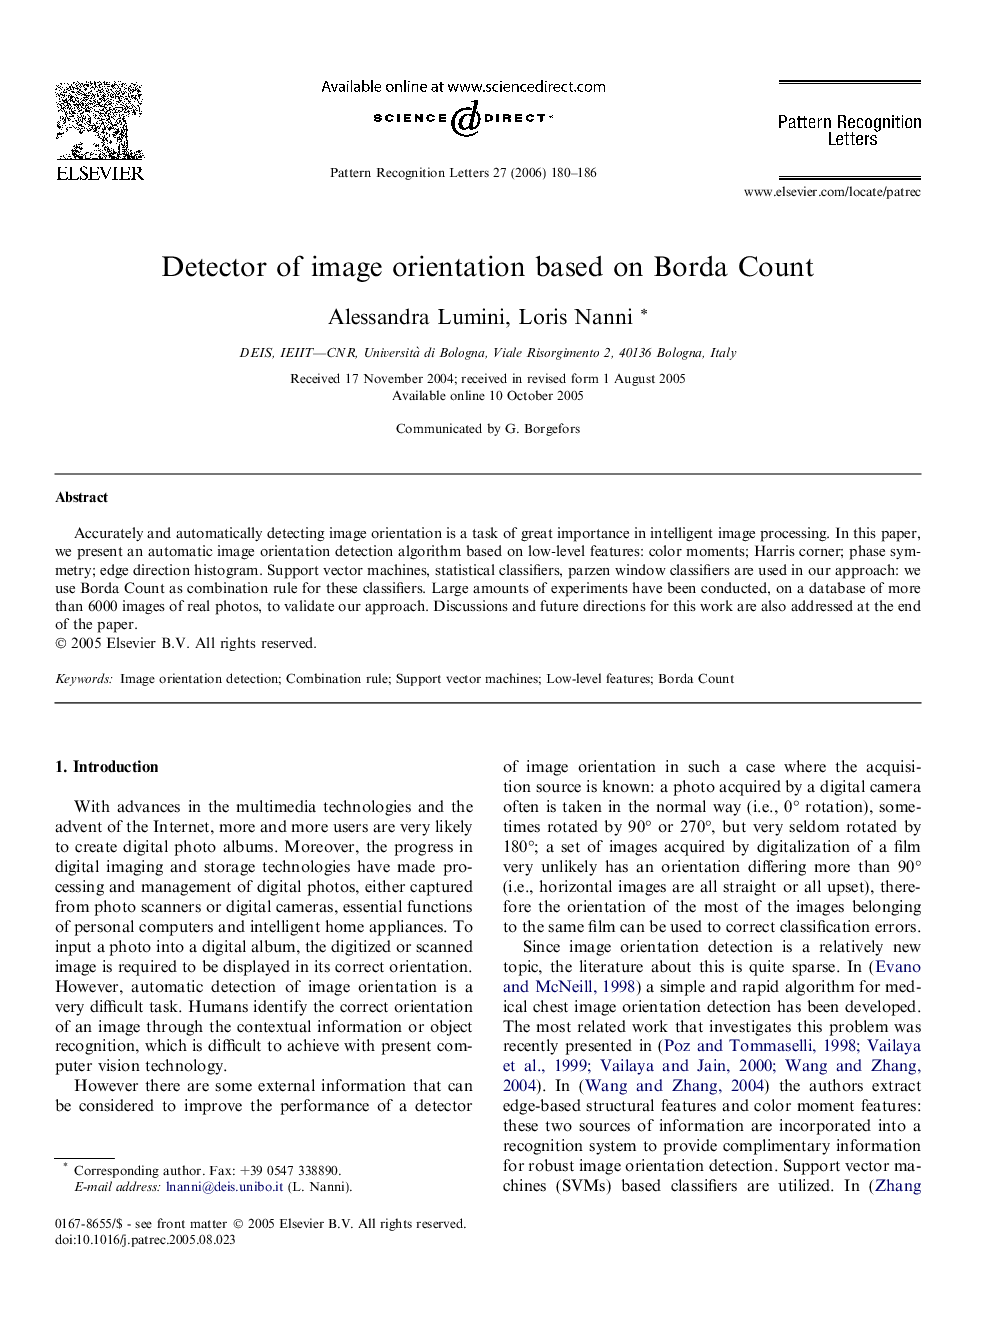 Detector of image orientation based on Borda Count